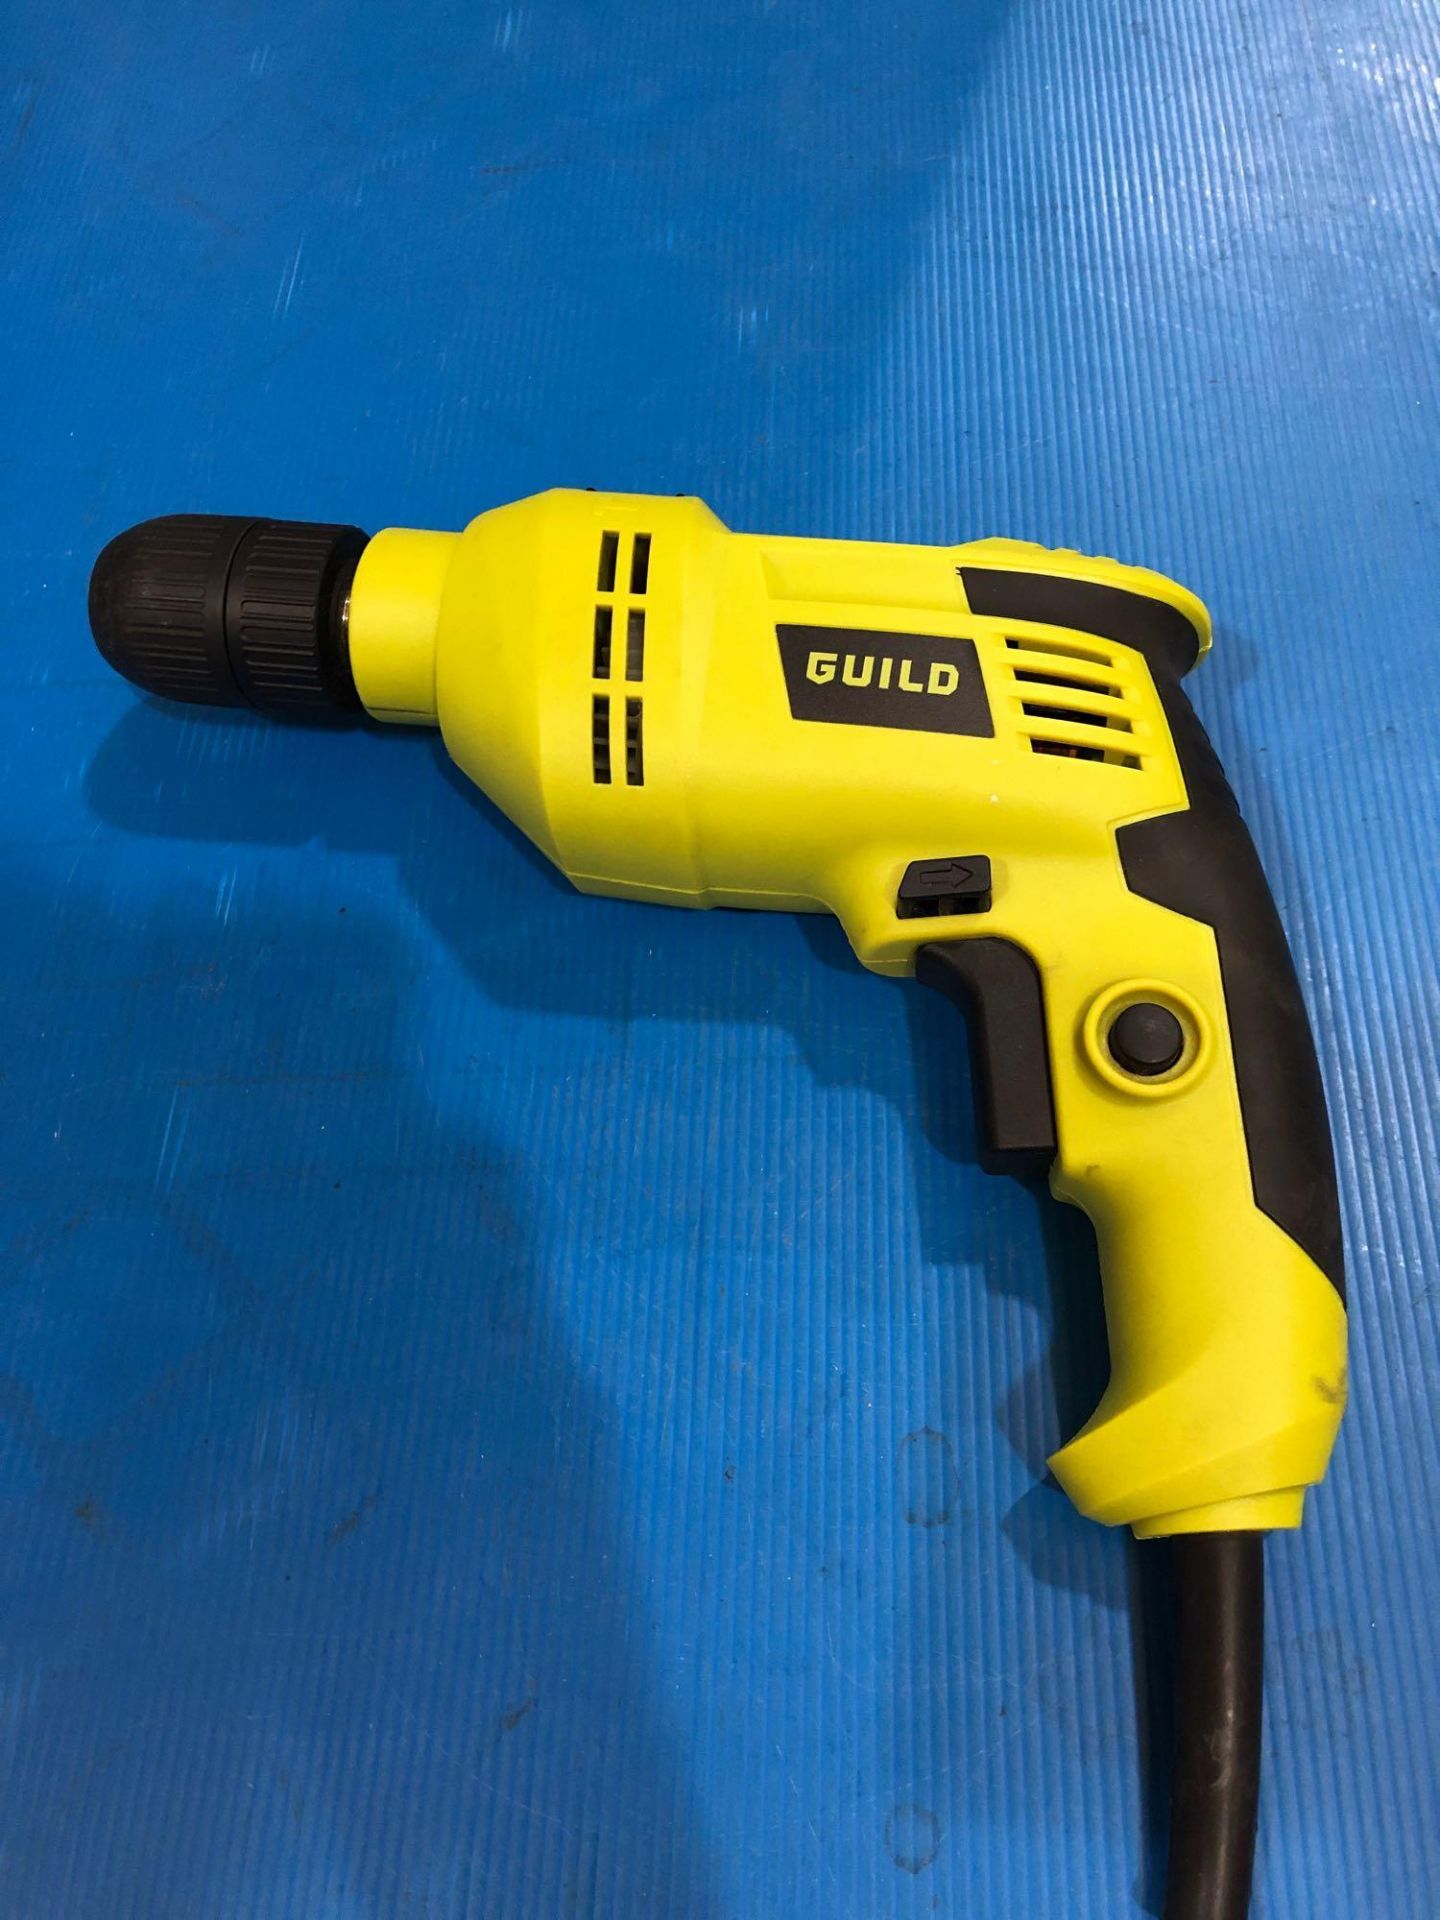 Guild 13mm Keyless Corded Hammer Drill - 600W (747/6606) - £25.00 RRP - Image 2 of 5